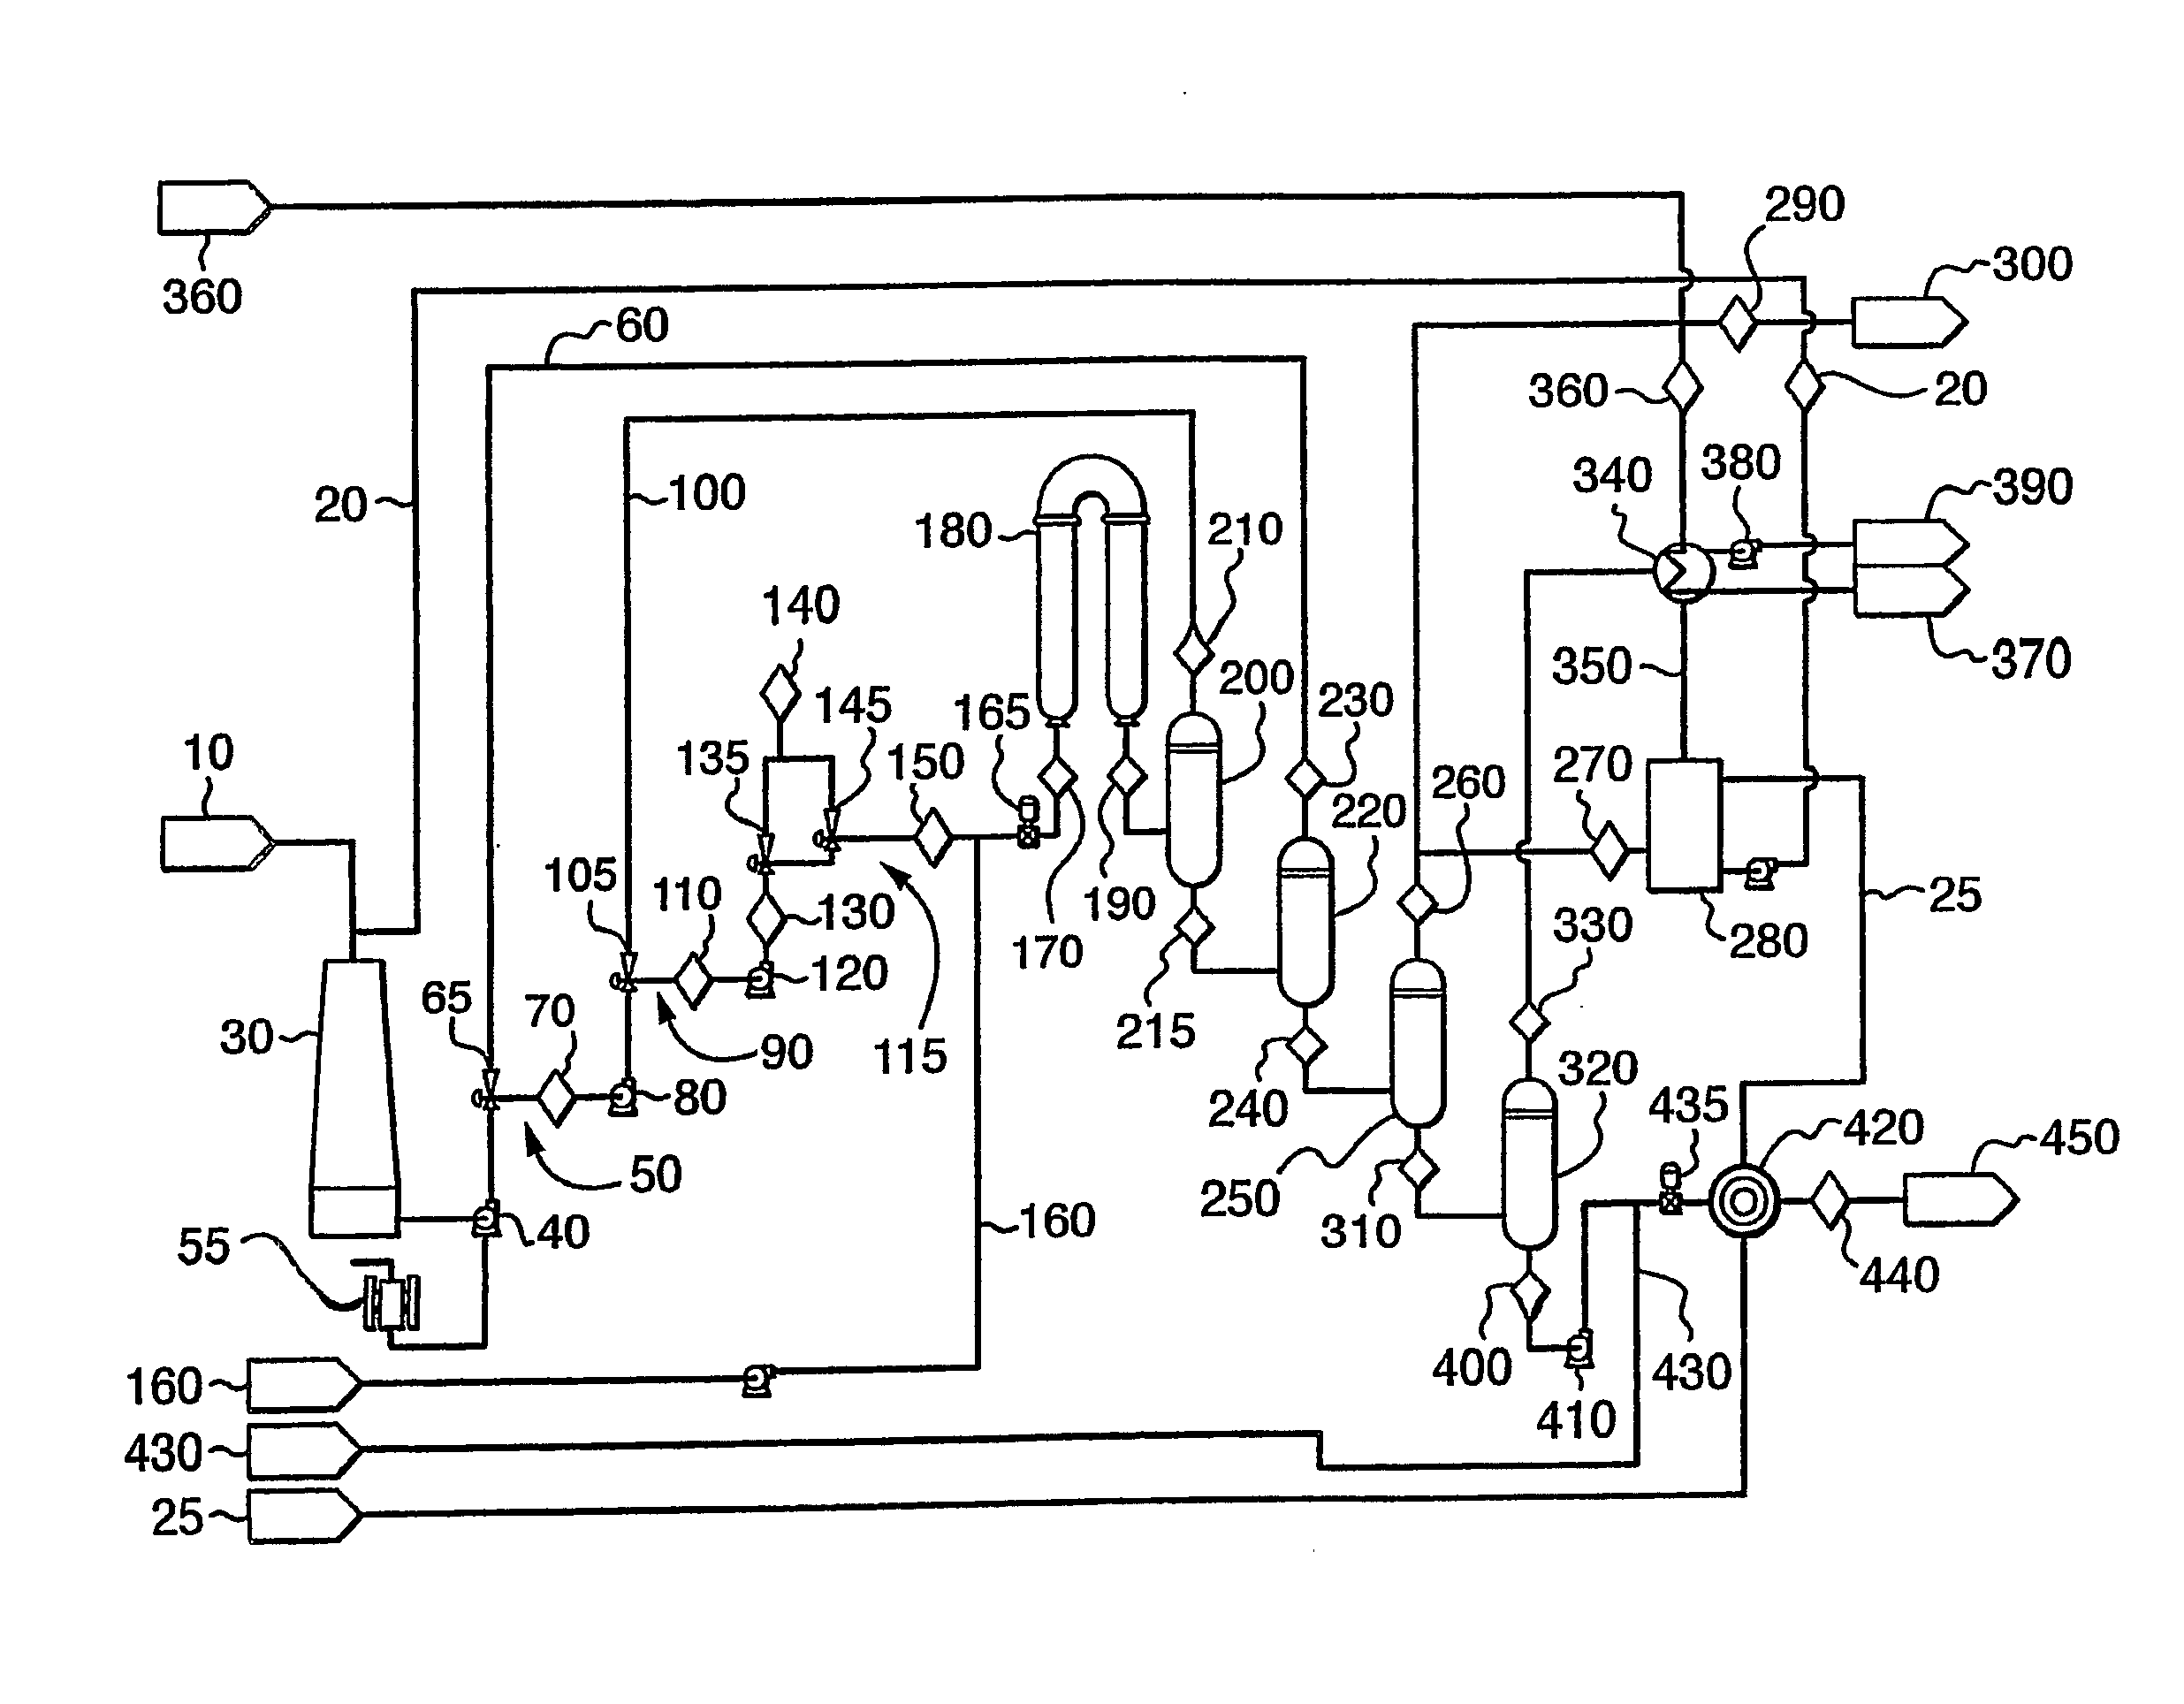 Continuous Flowing Pre-Treatment System with Steam Recovery